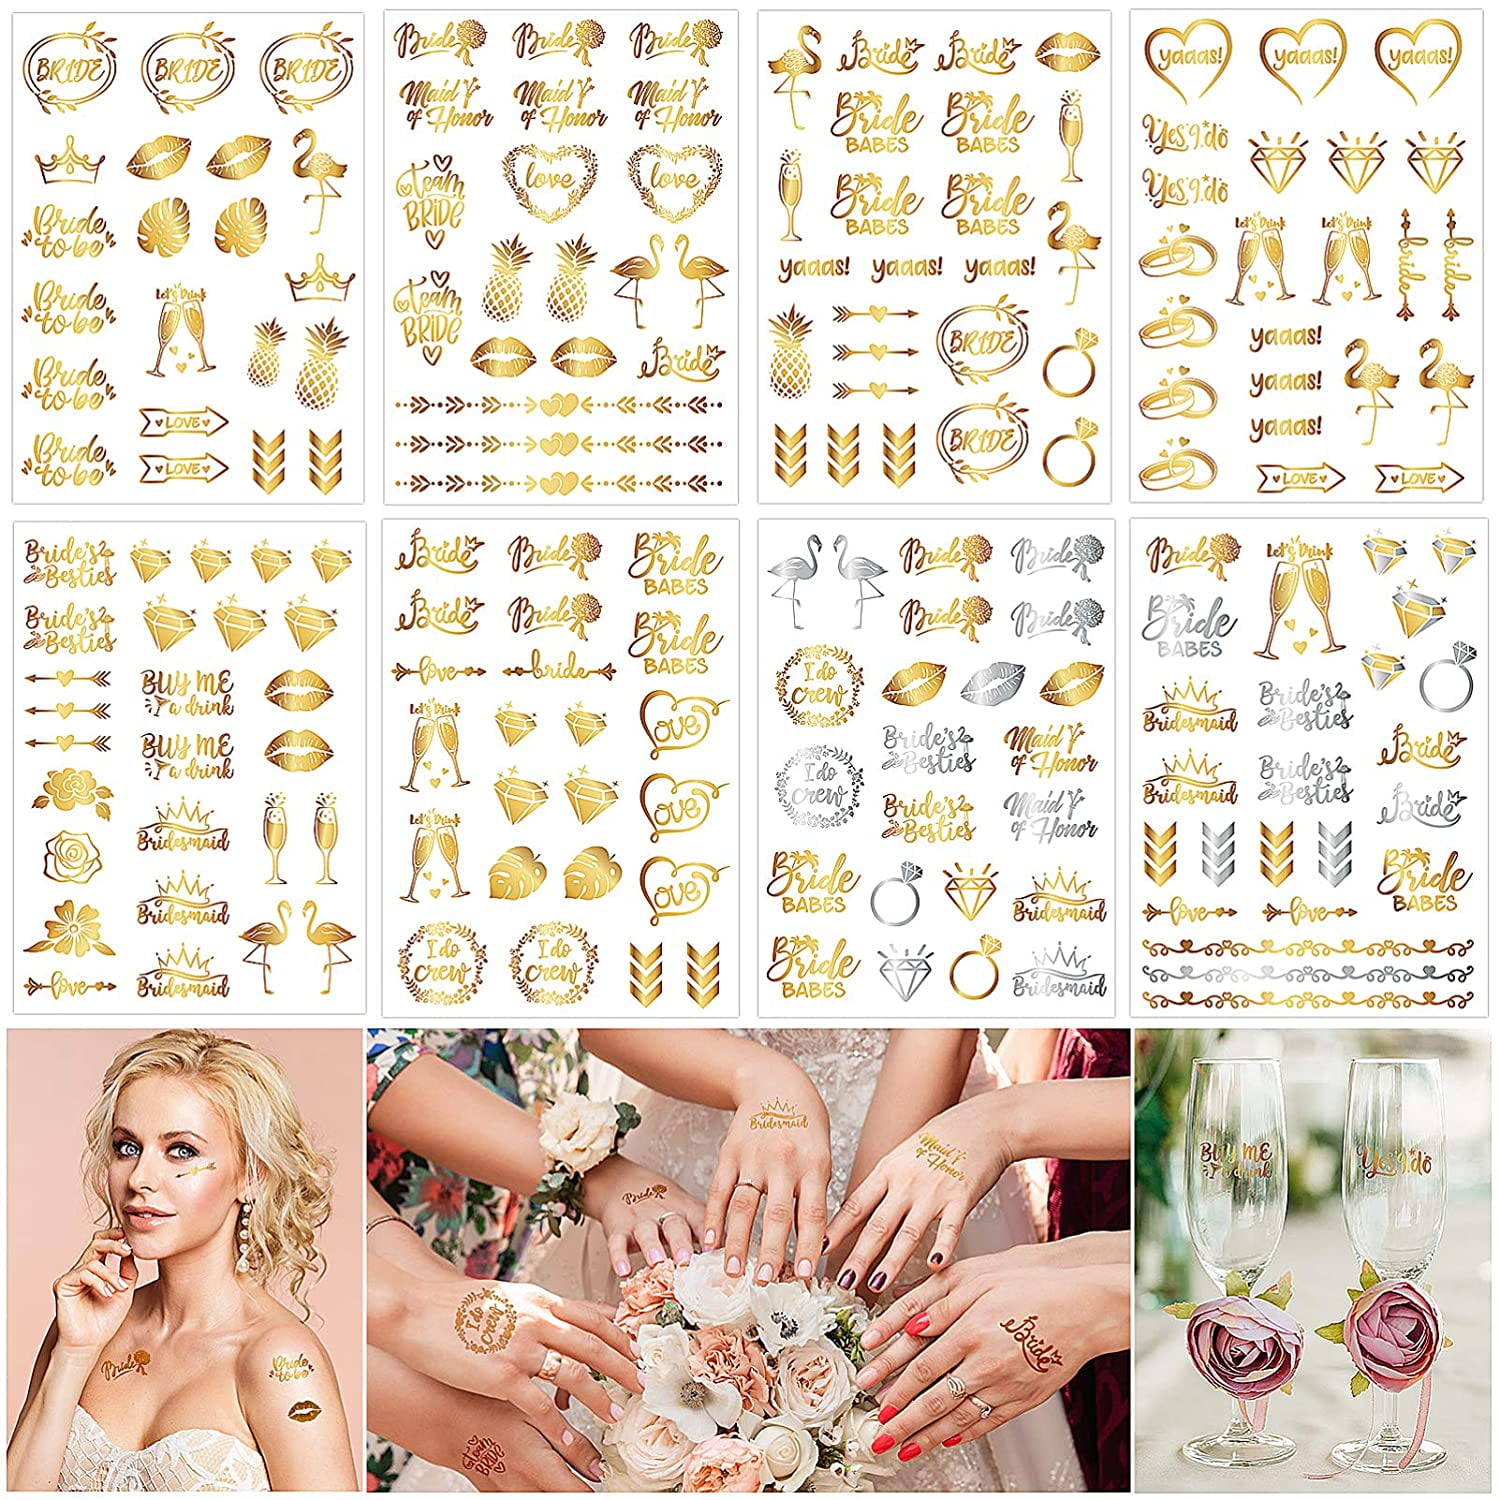 50 Temporary Tattoos for a Bachelorette Party  Moms Got the Stuff